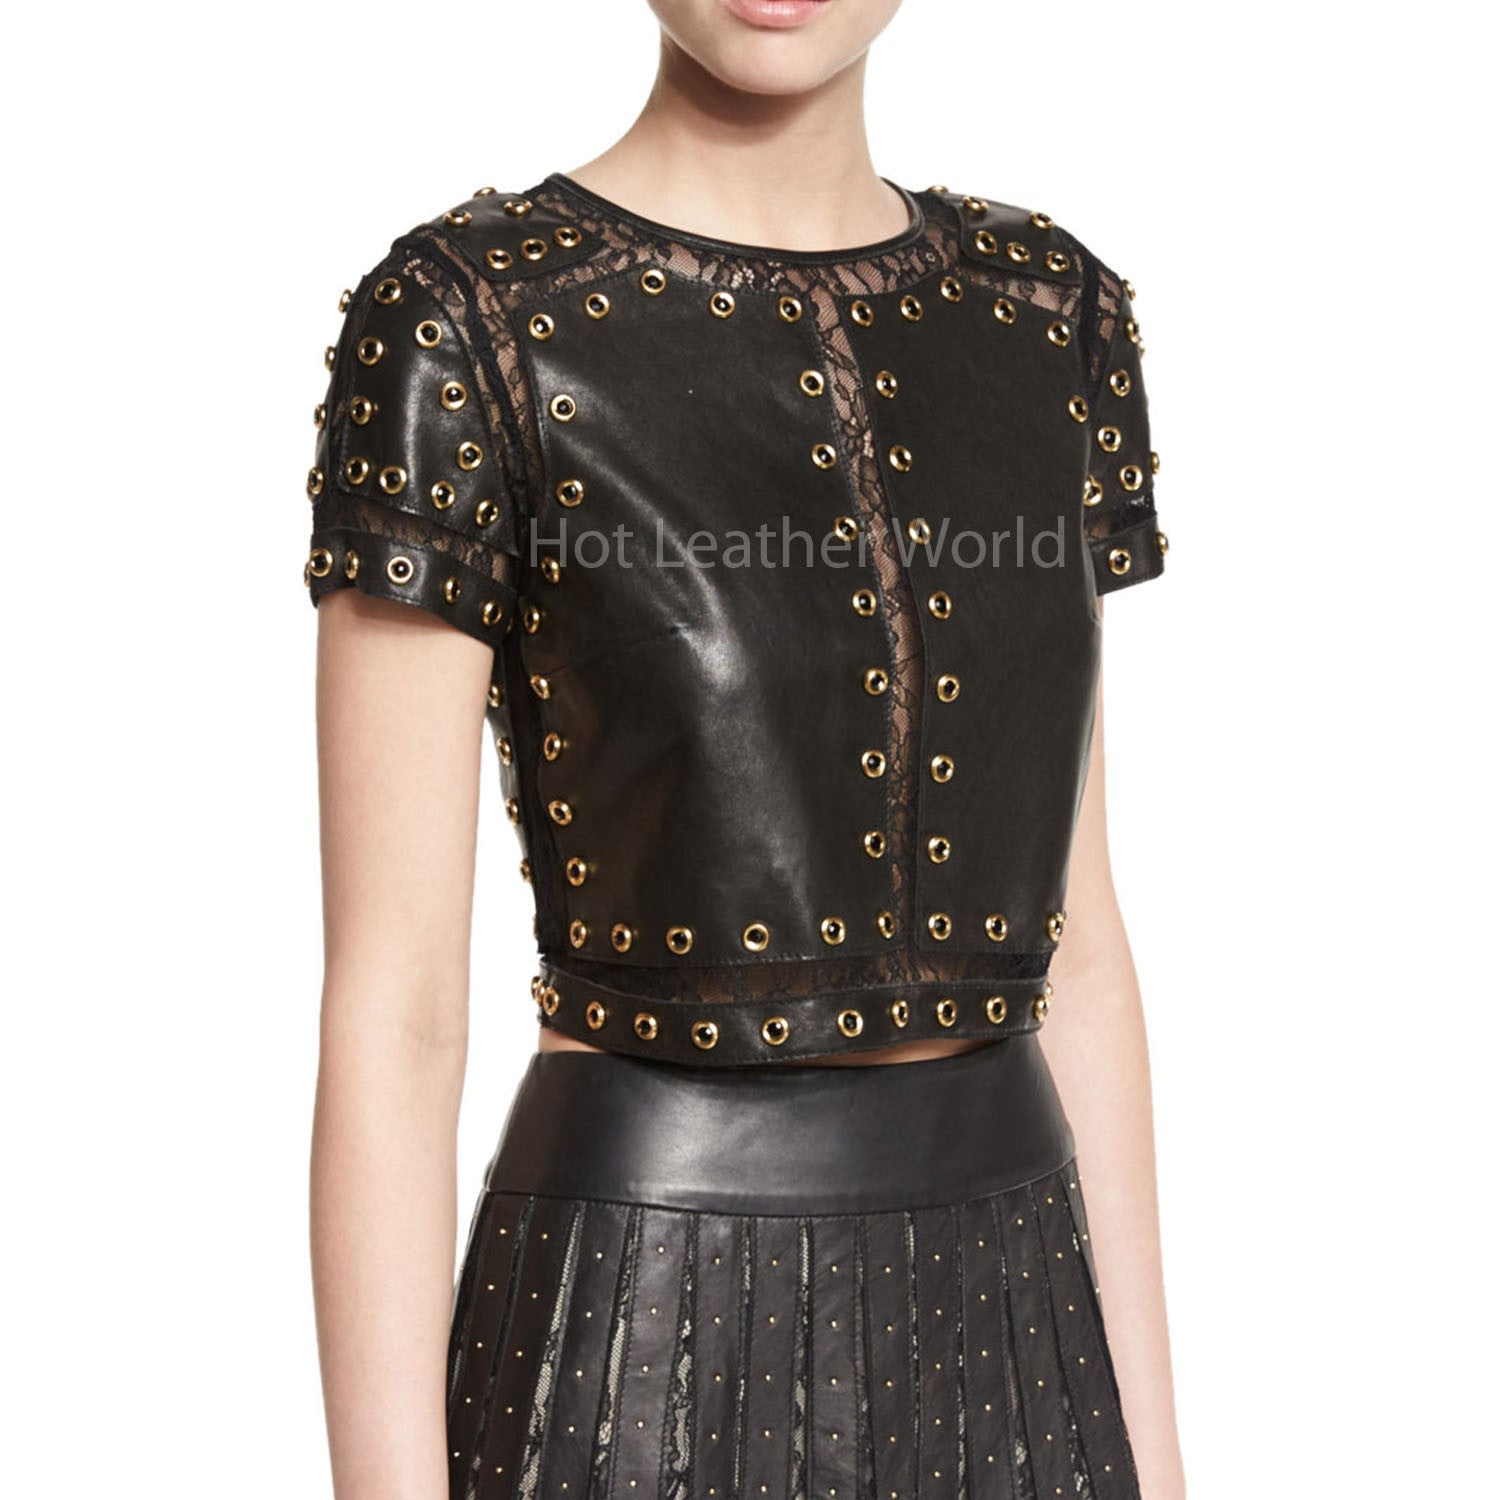 Studded Leather Top With Lace Trim -  HOTLEATHERWORLD